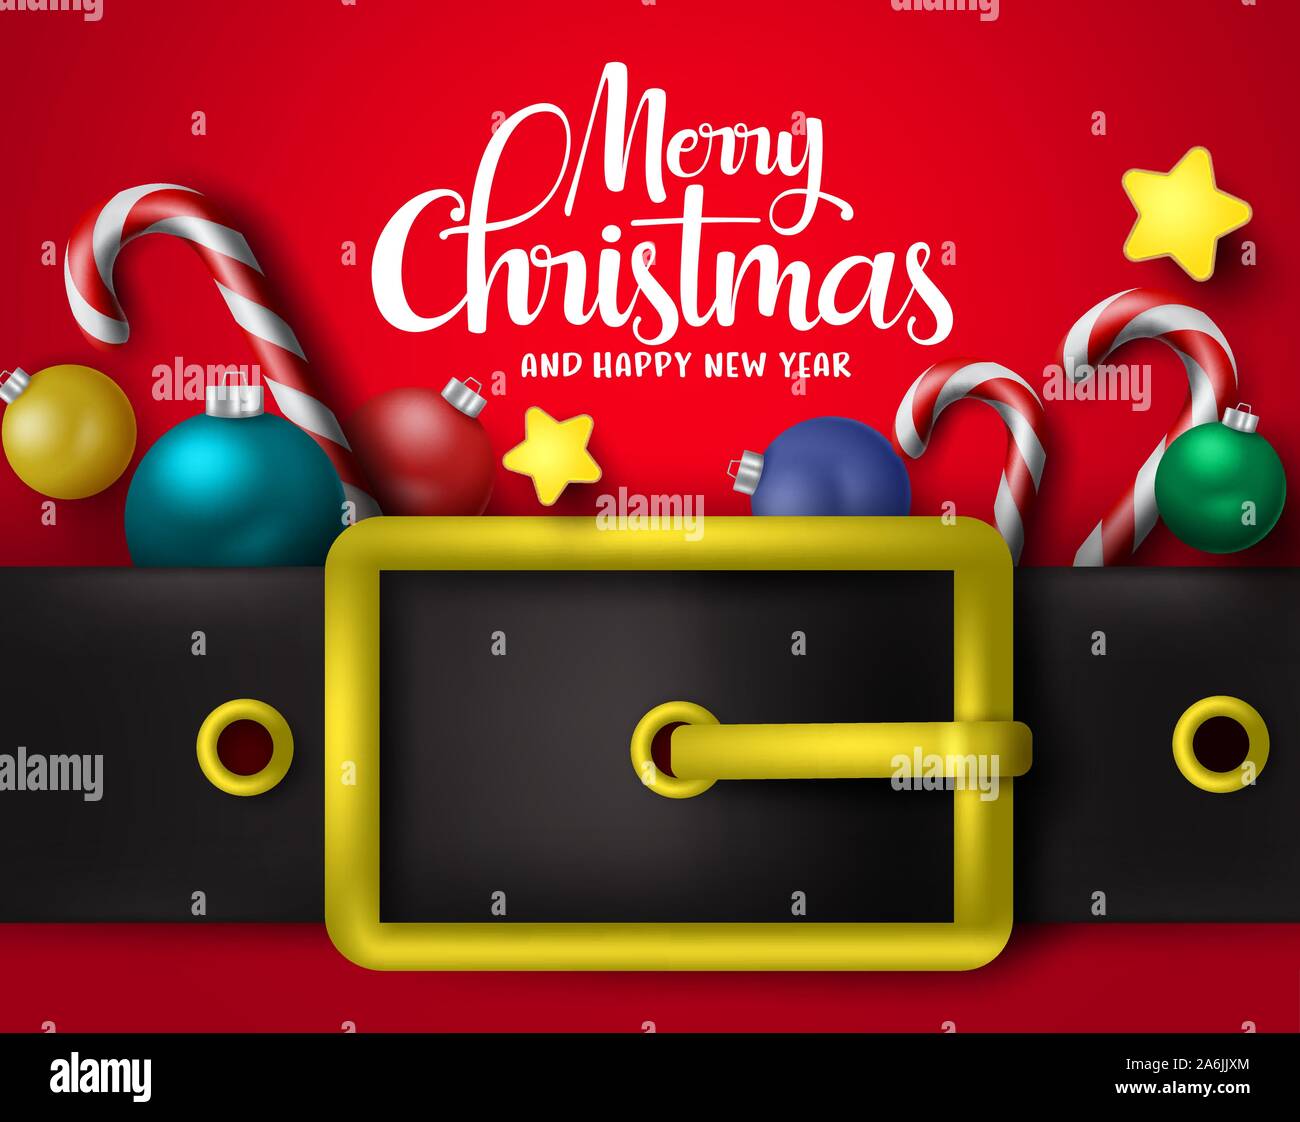 Merry Christmas greeting with big belt vector background design. Merry chirstmas typography text with xmas decor elements of candy cane, balls. stars. Stock Vector